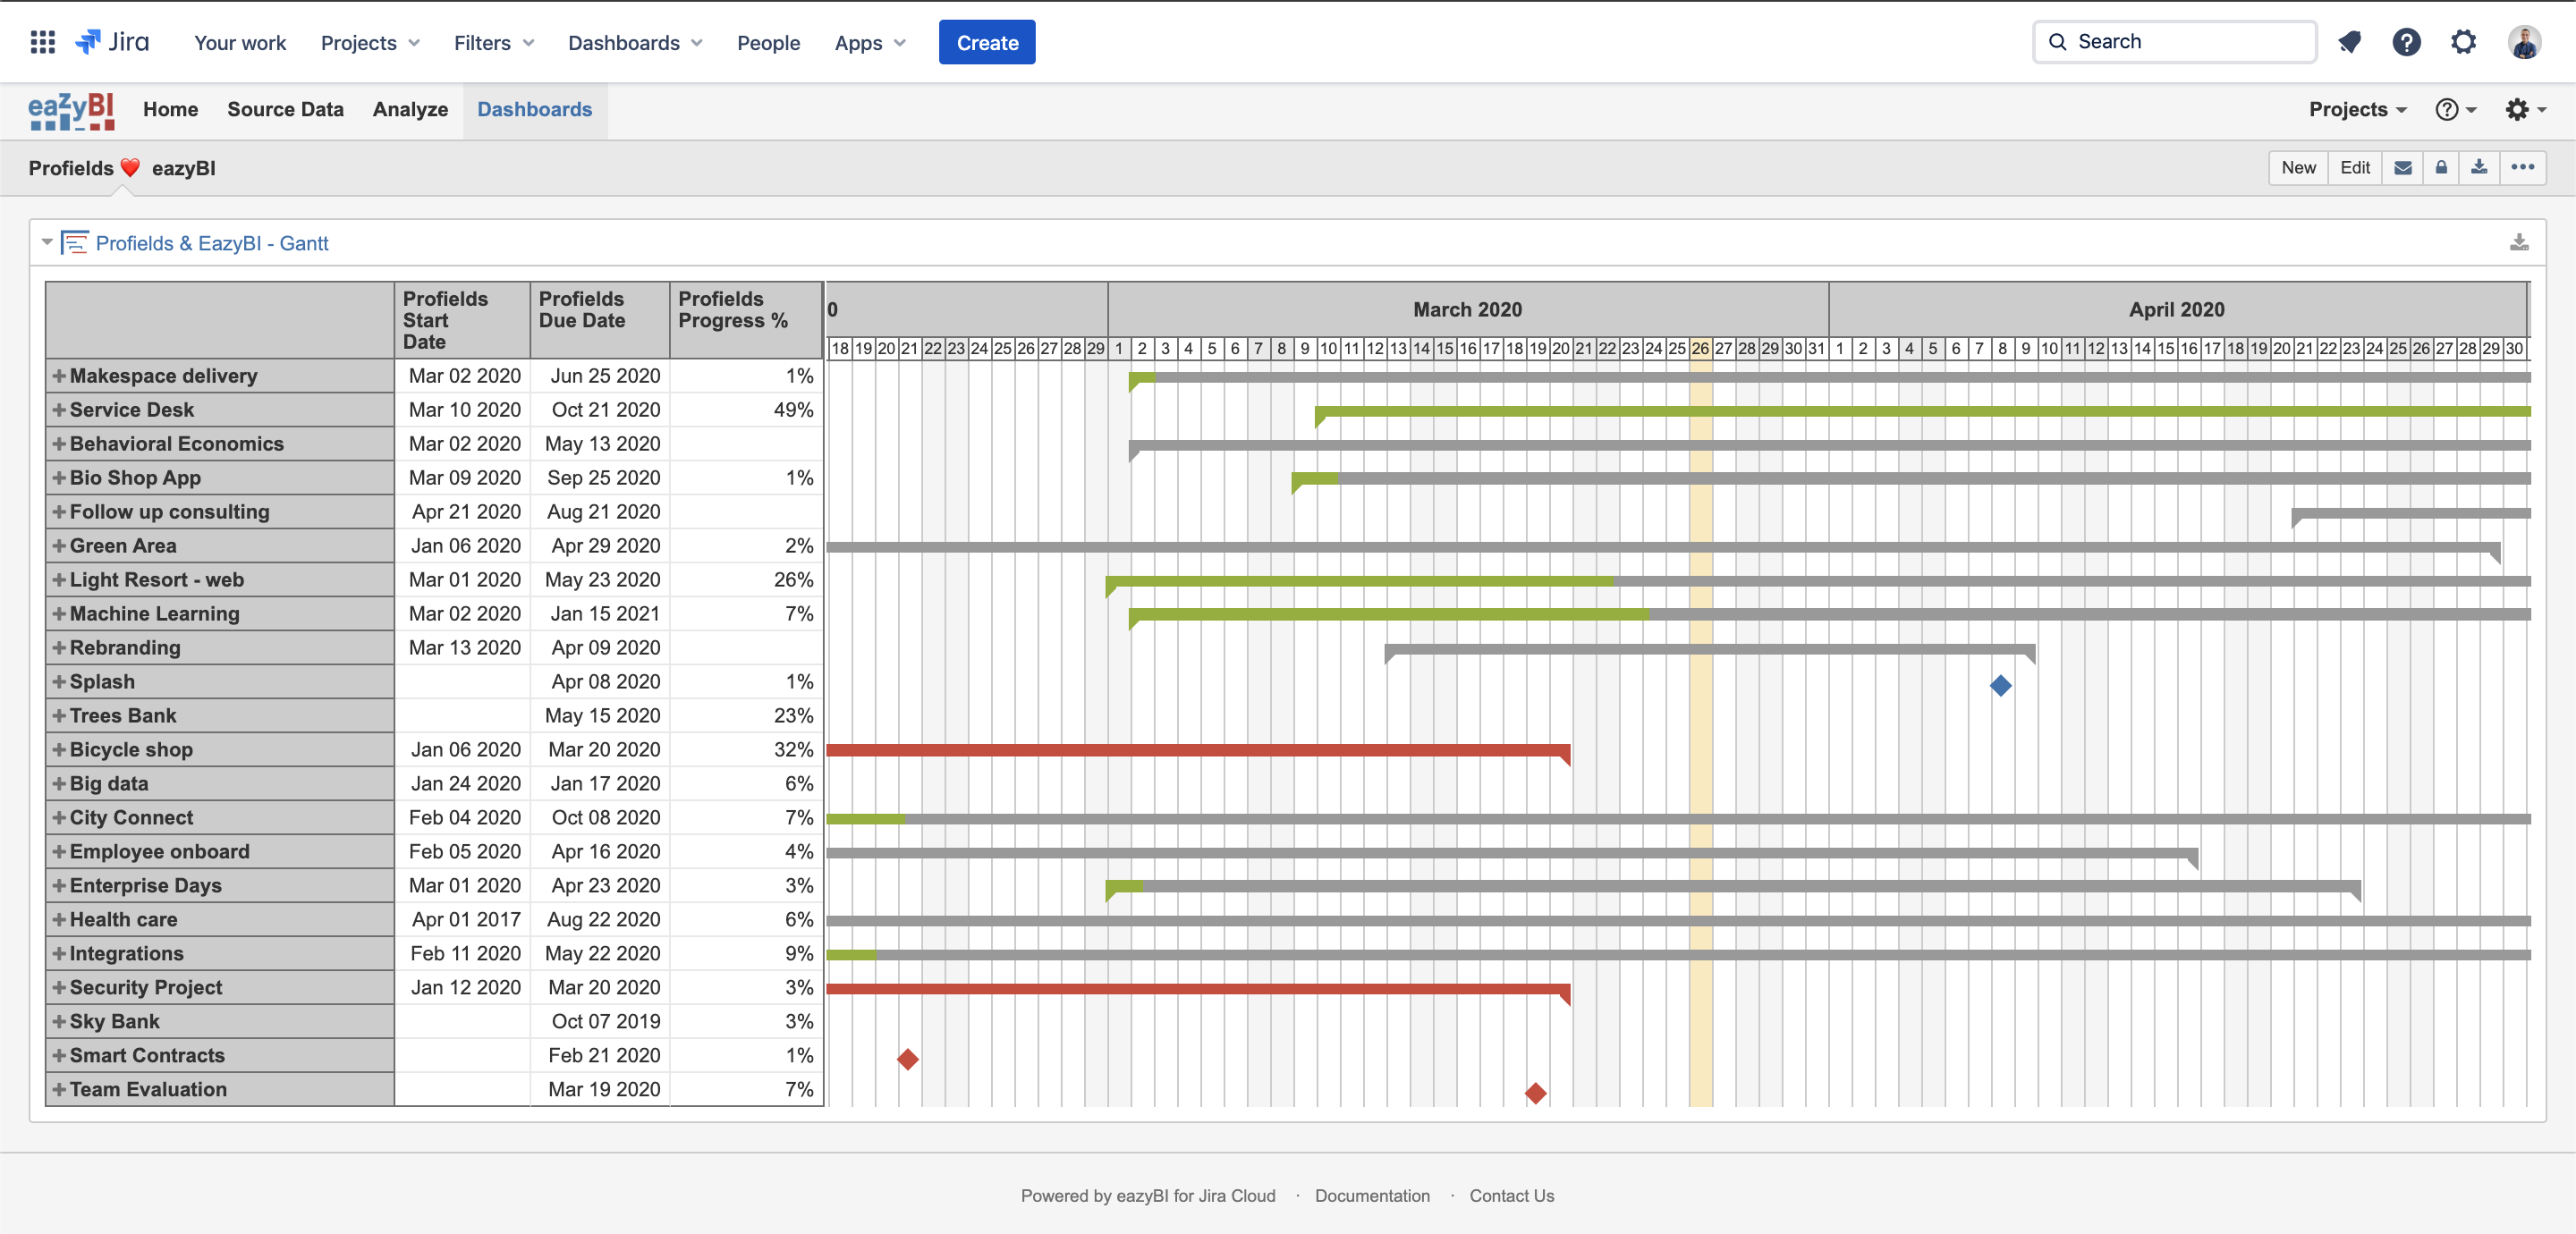 eazyBI Gantt chart with Profields project specific information for Jira